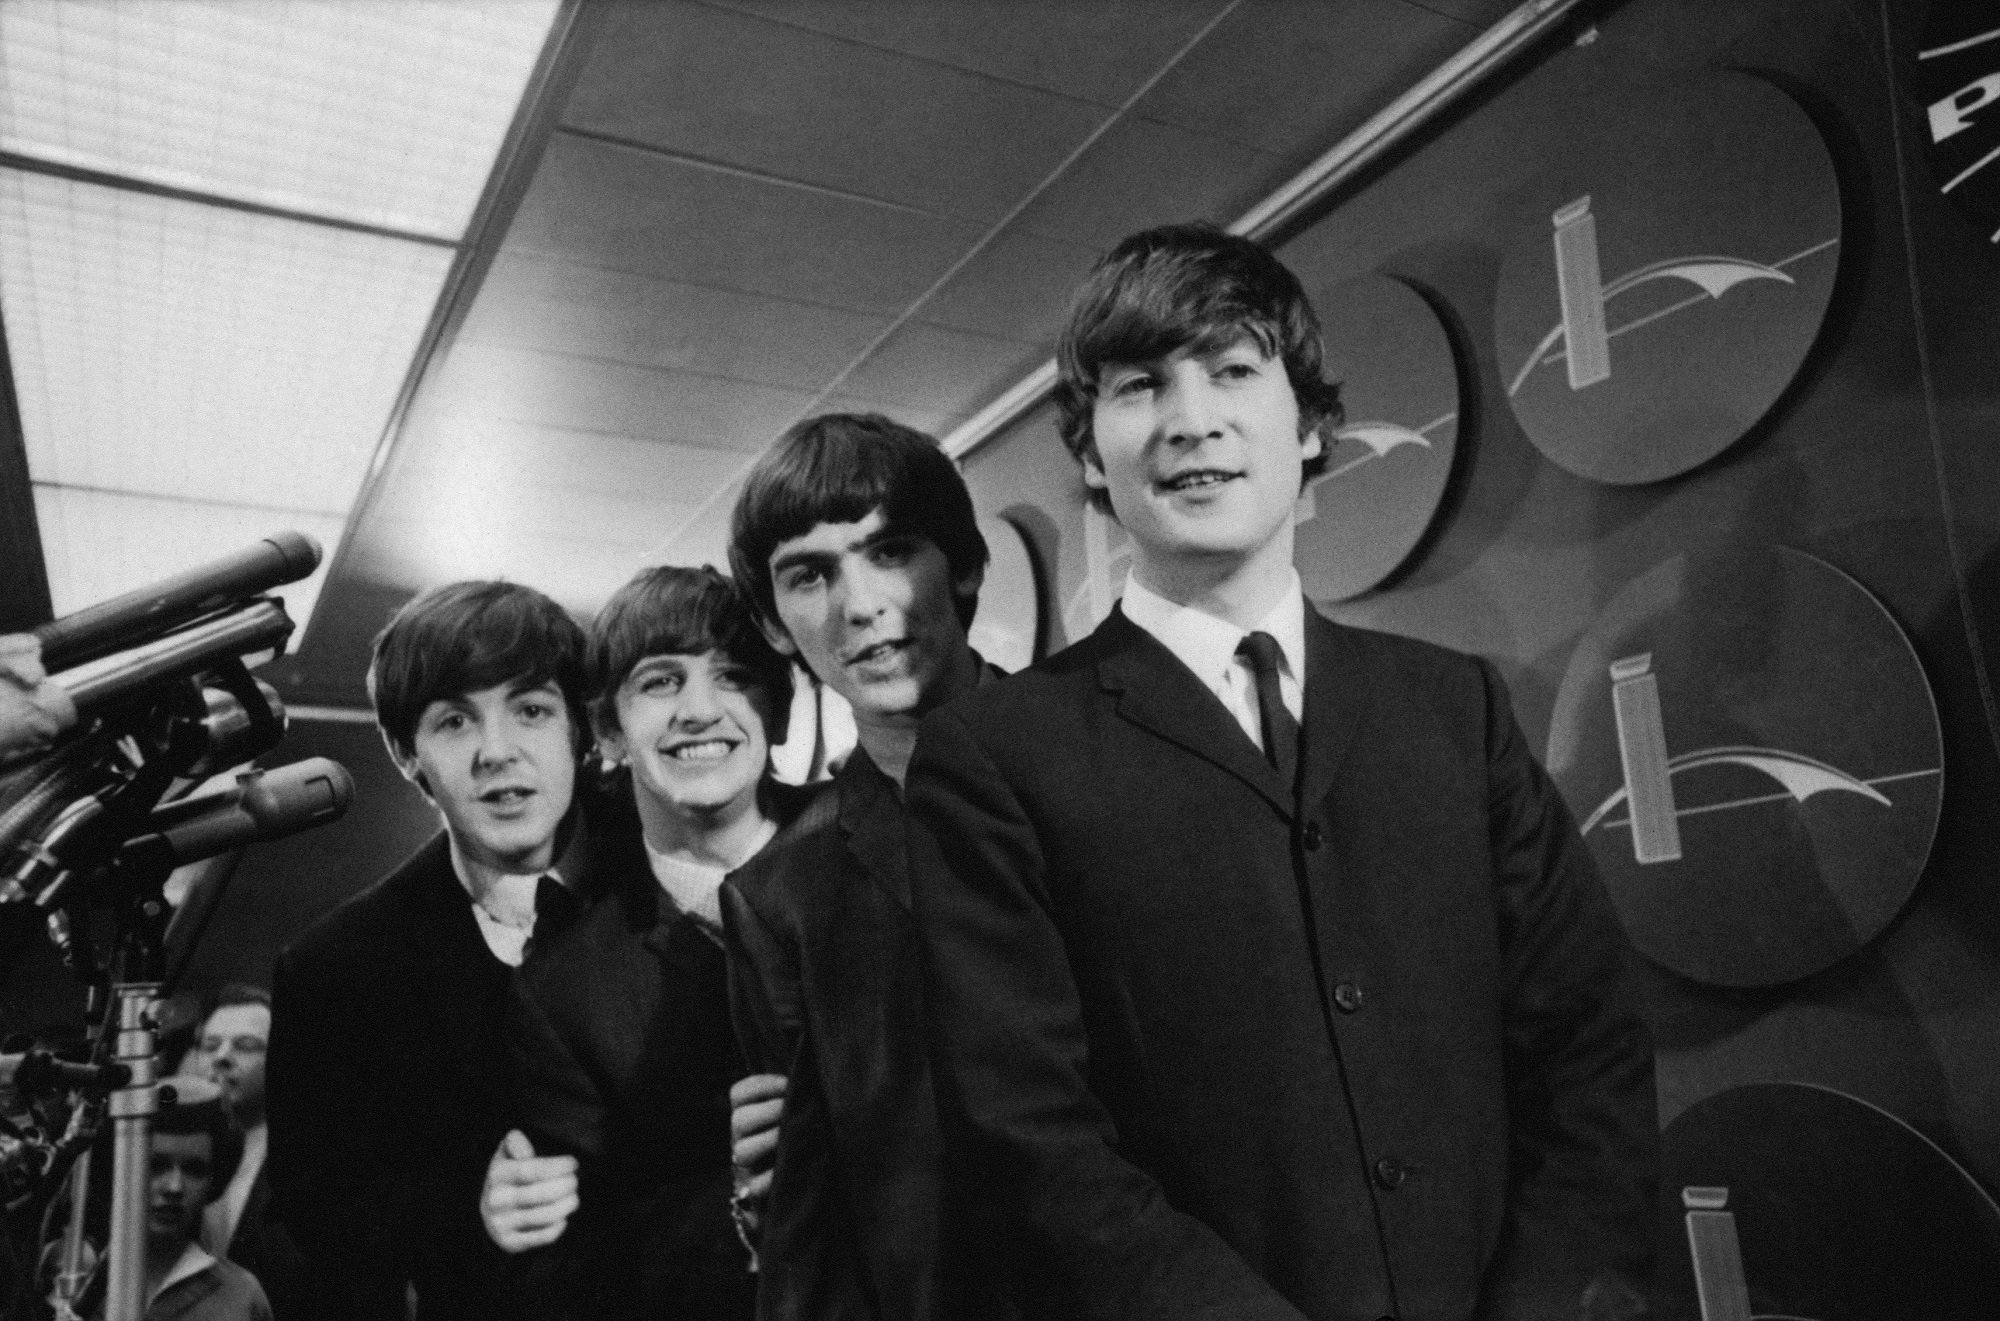 A black-and-white photo of The Beatles in 1964